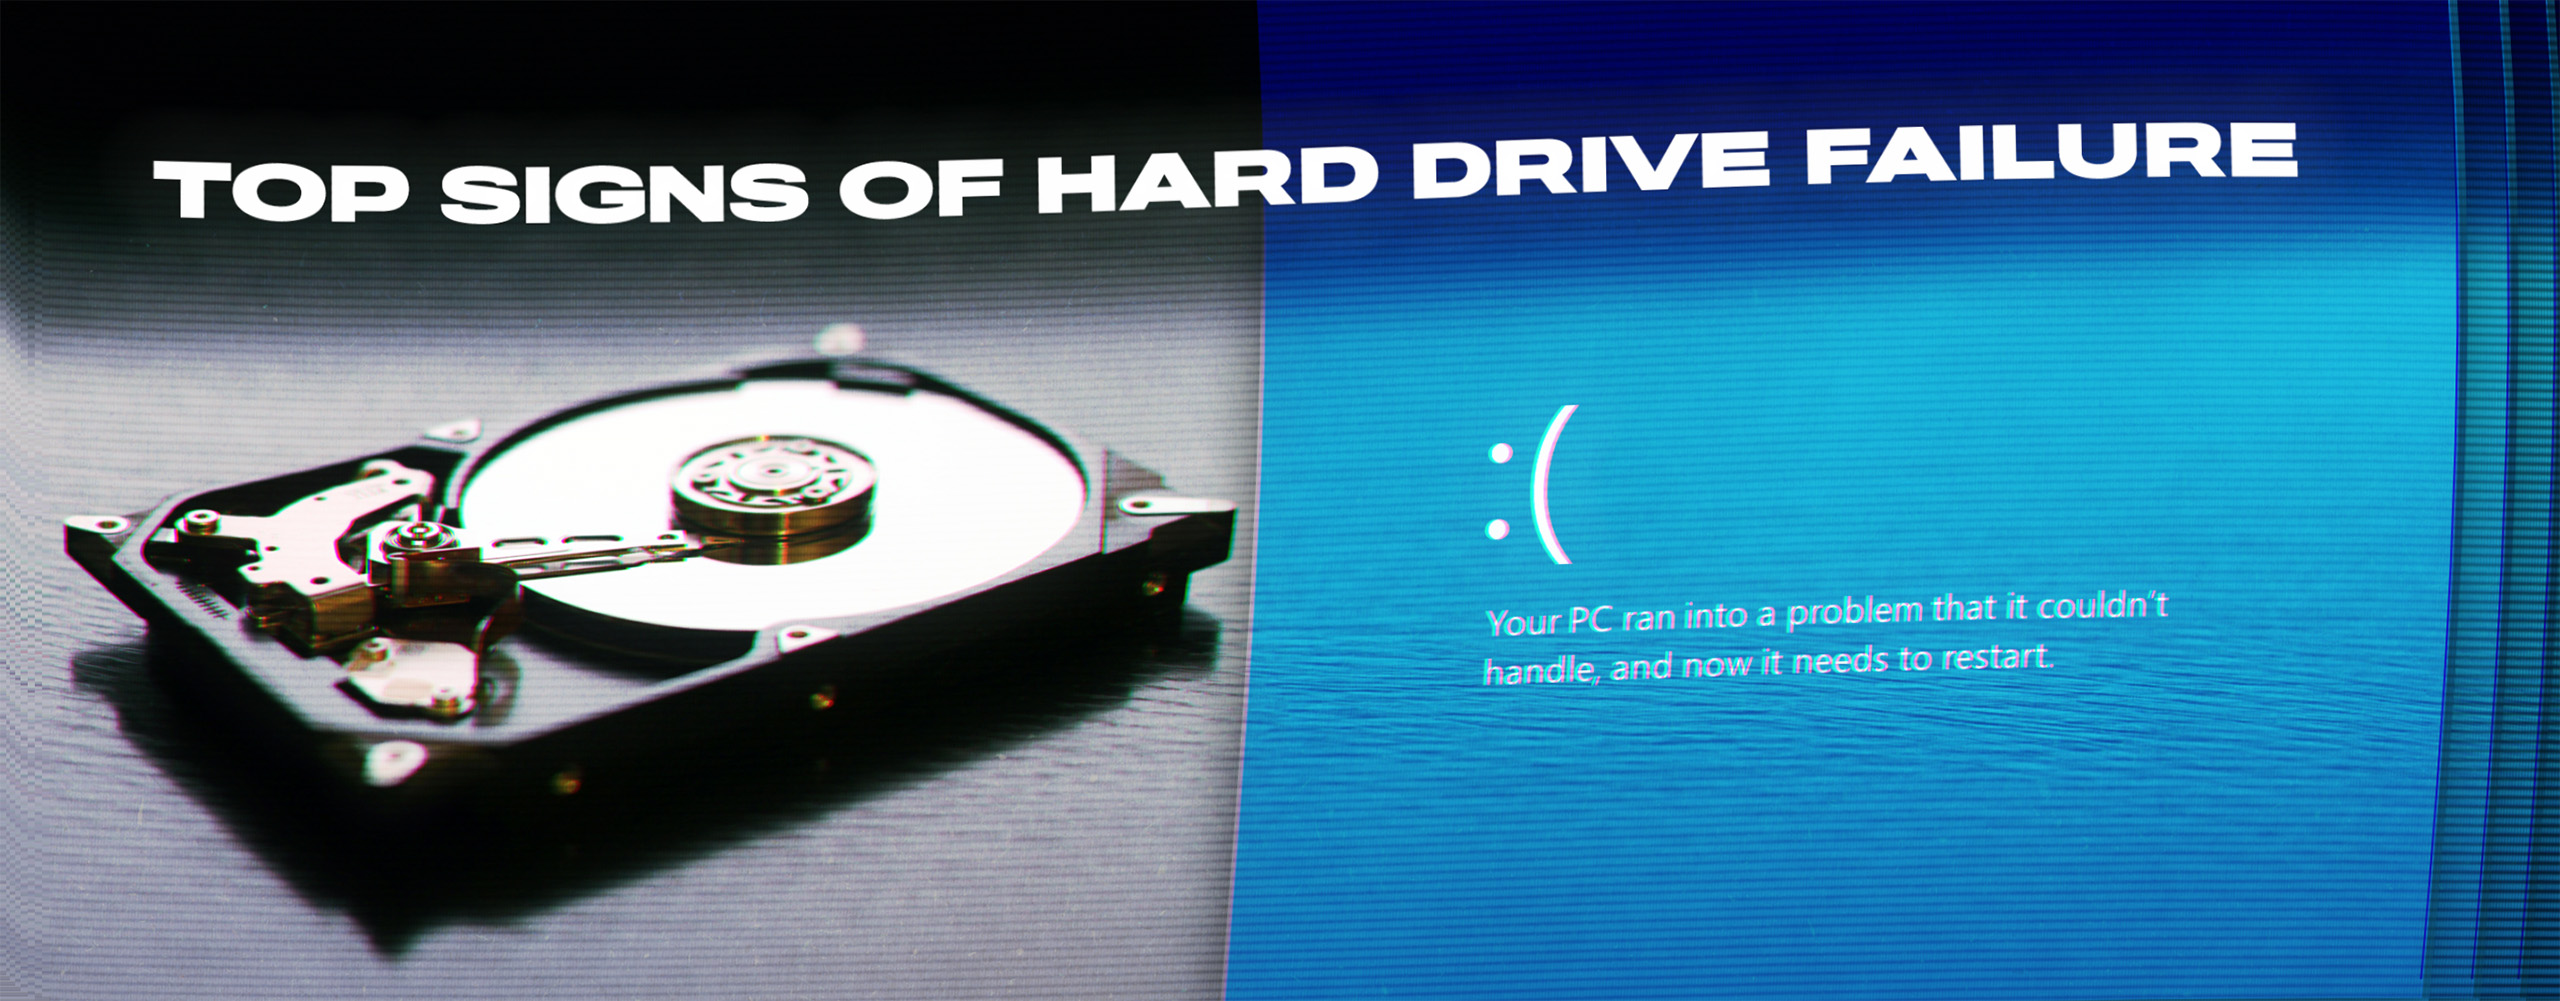 Hard Drive Failure: Top Signs It’s Immanent